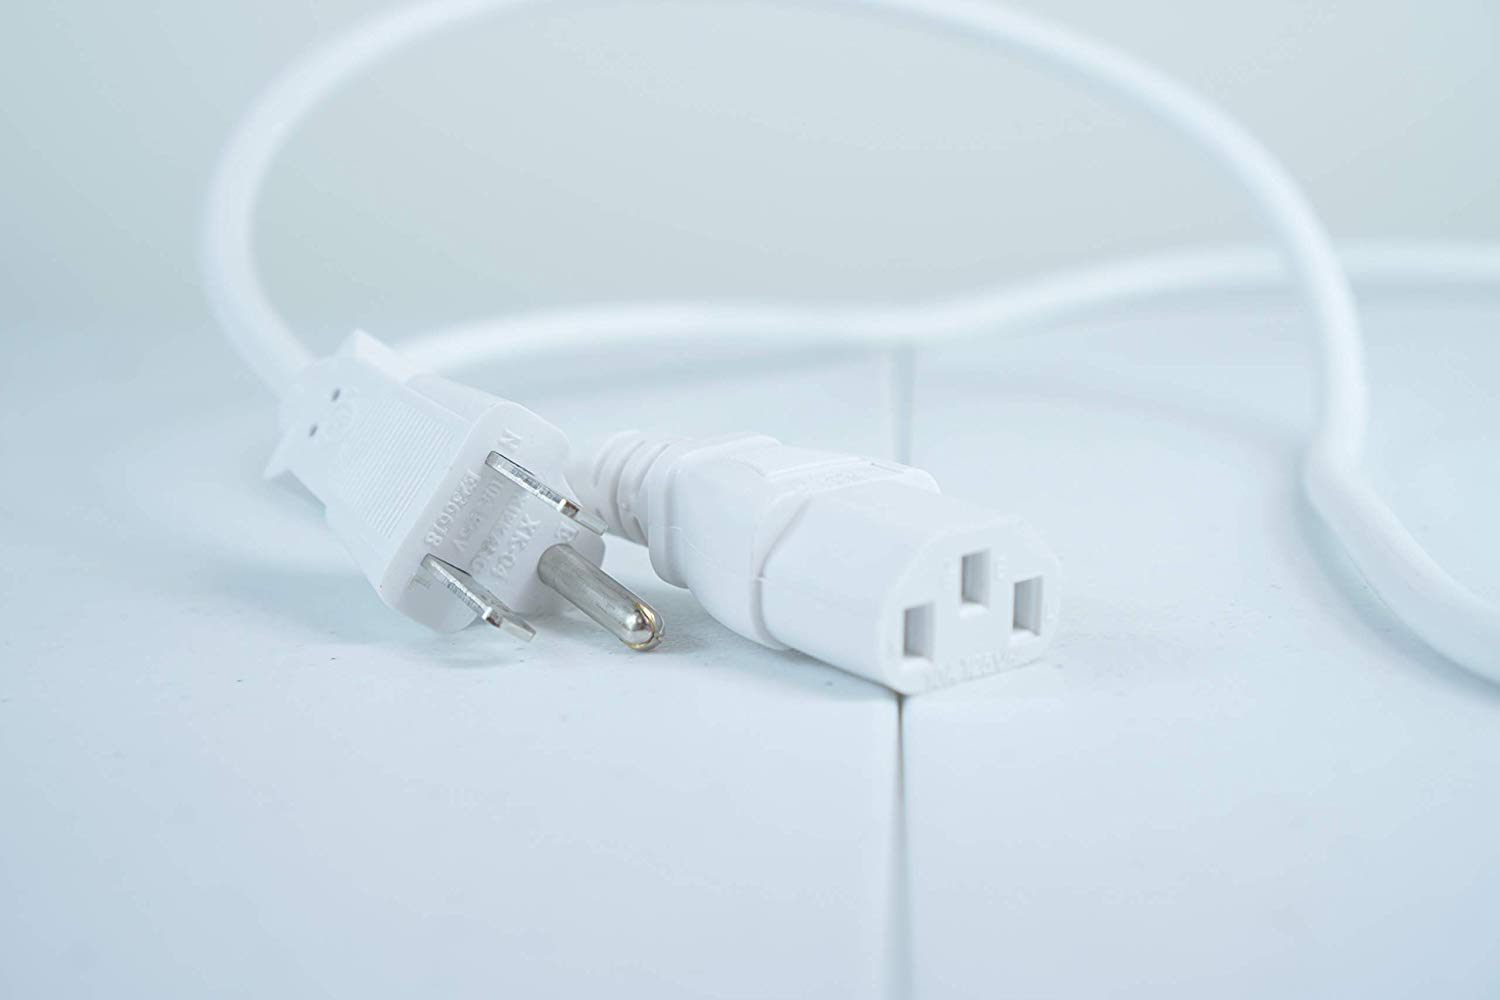 OMNIHIL (15FT-WHT) AC Power Cord for Crown XTi4002 DriveCore Two Channel 1200W At 4 ohms Power Amplifier - image 4 of 6